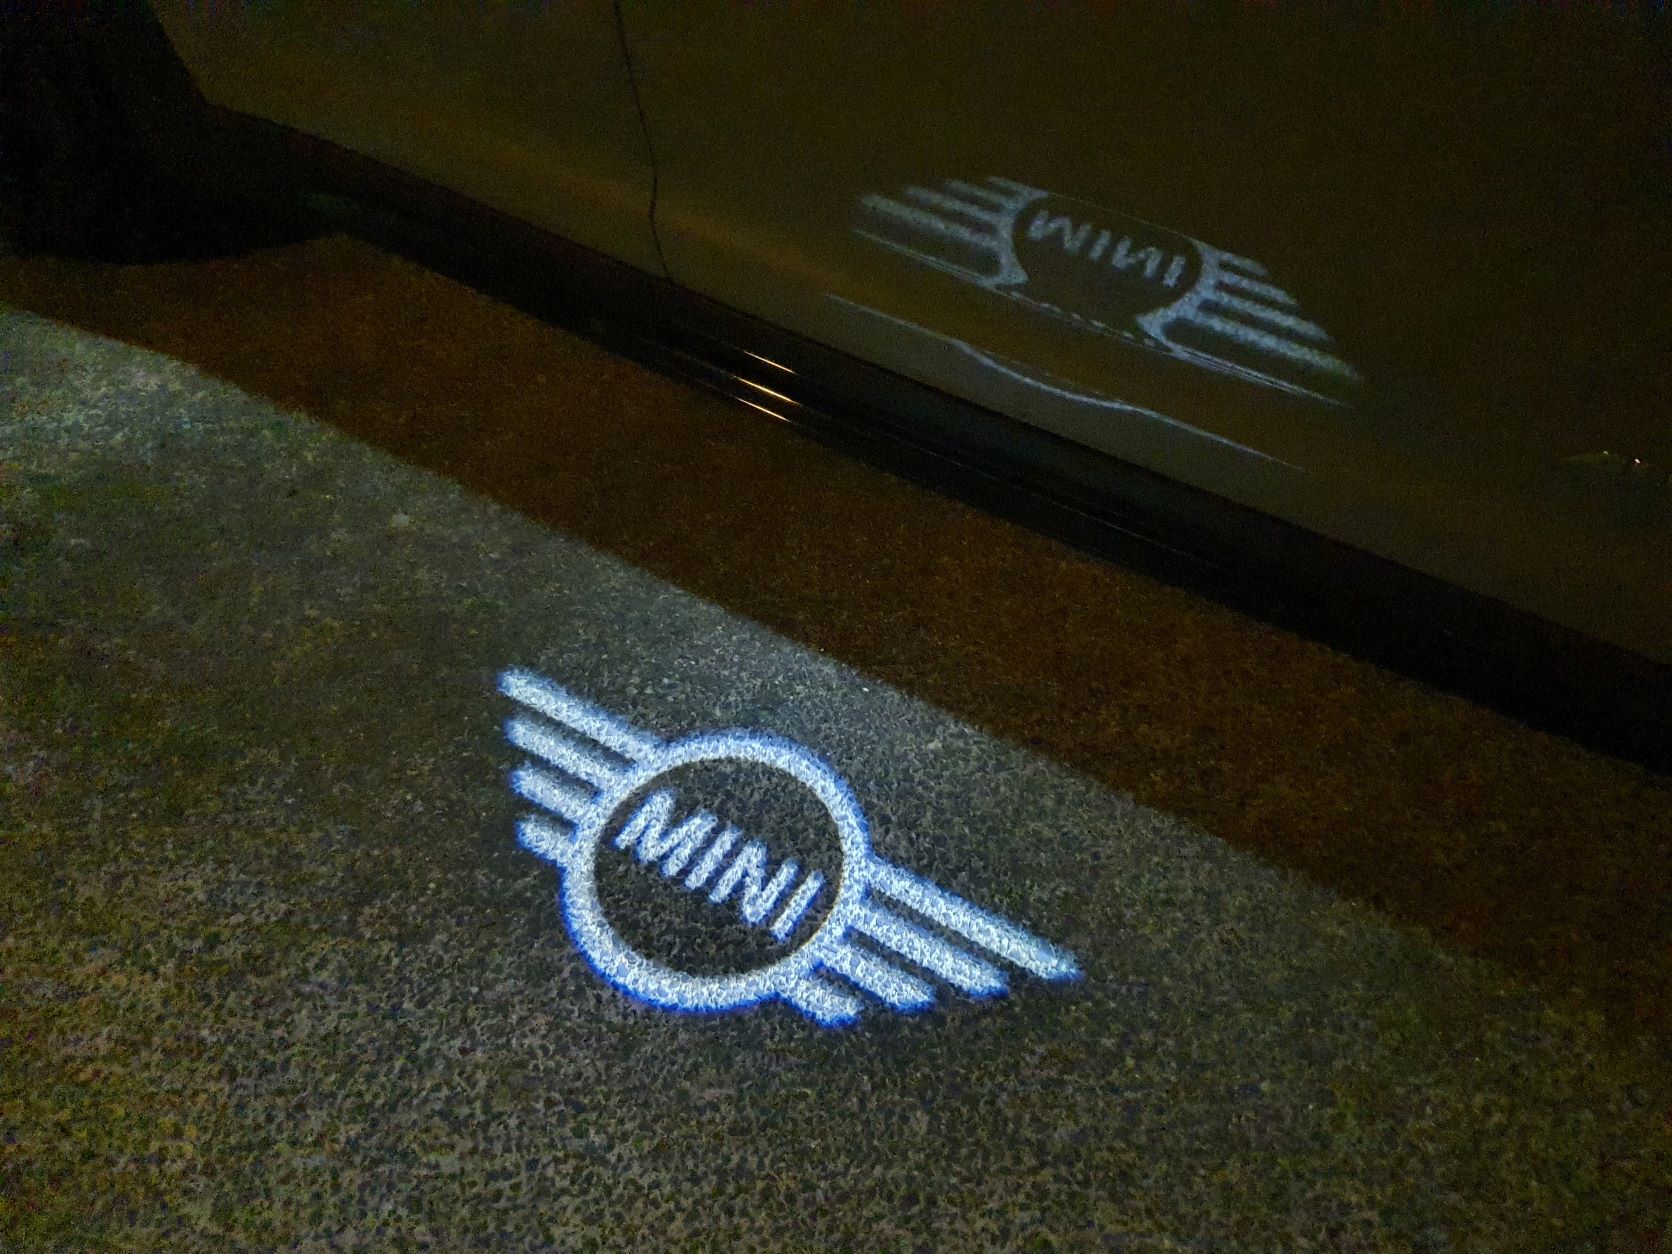 Mini puddle lighting from the mirror of the Mini Countryman Cooper S E All4